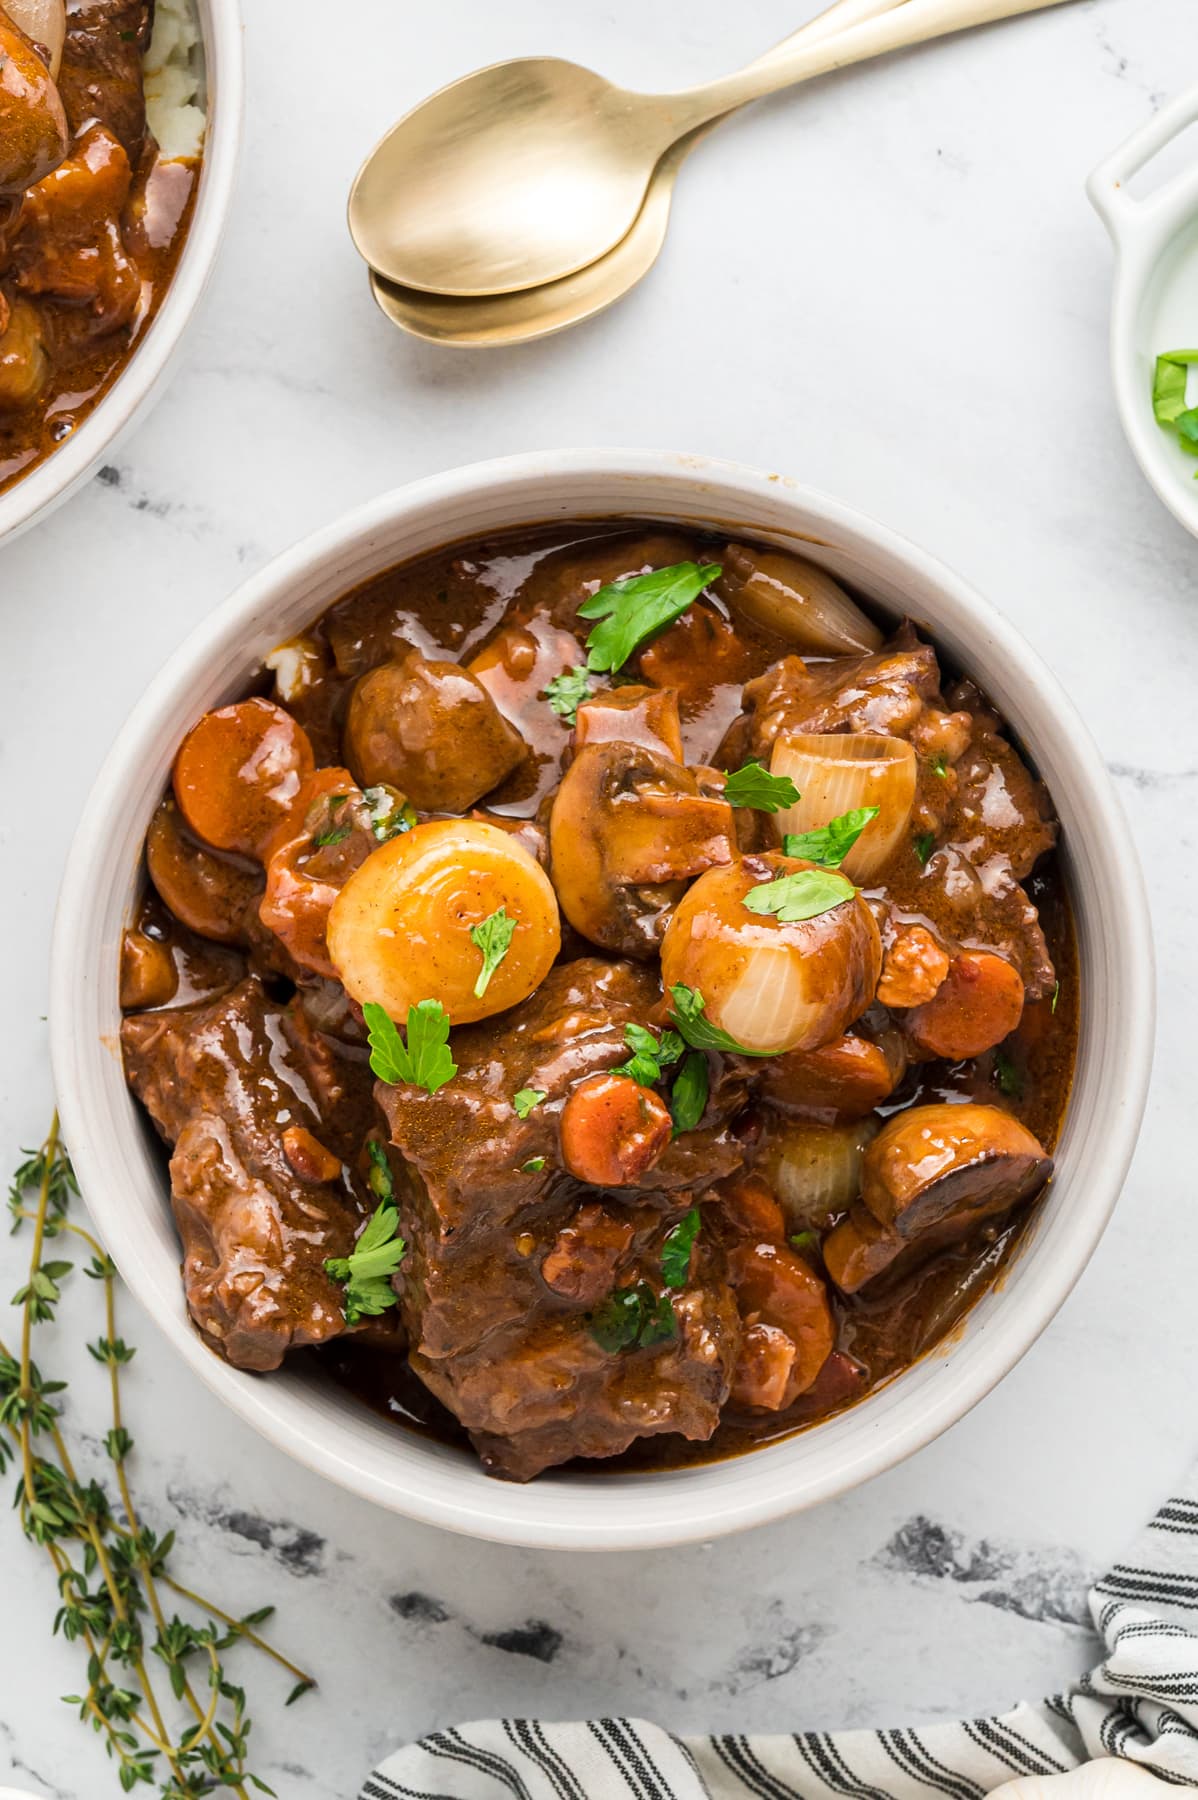 Overhead view of a bowl of Beef Bourguignon